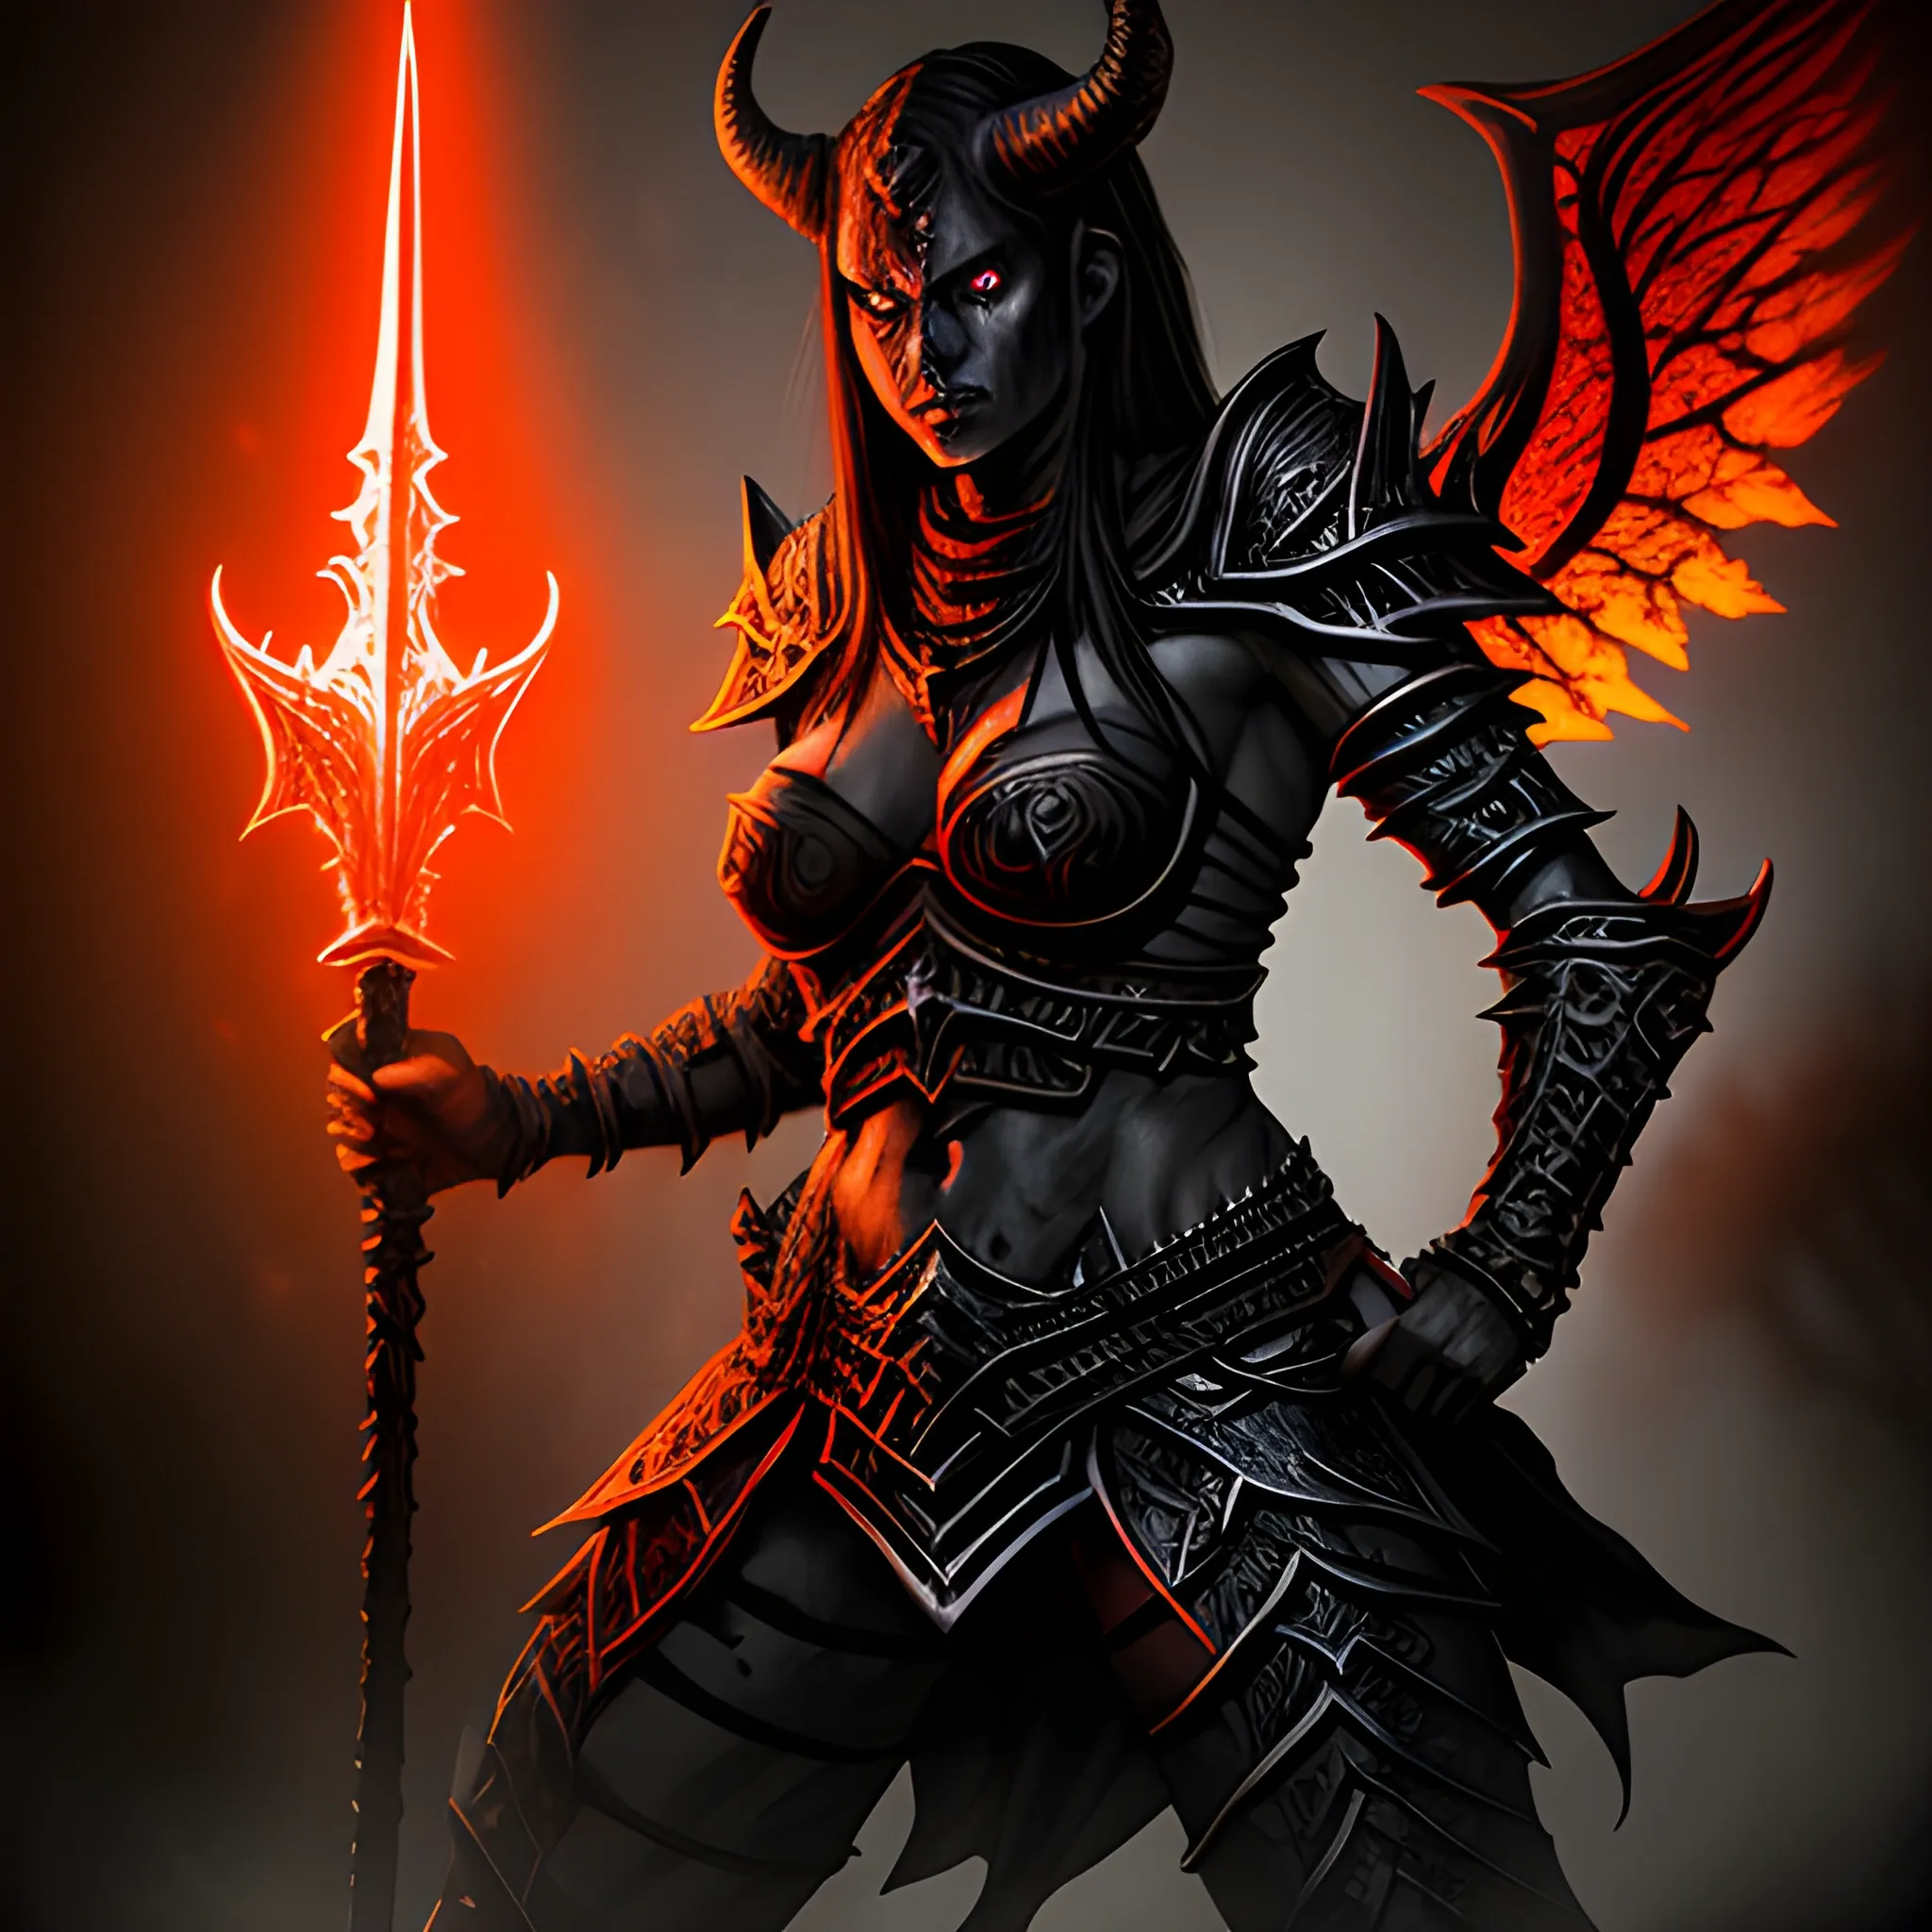 high definition, high fantasy D&D, intimidating female demon 
with glowing eyes, in black warrior armor